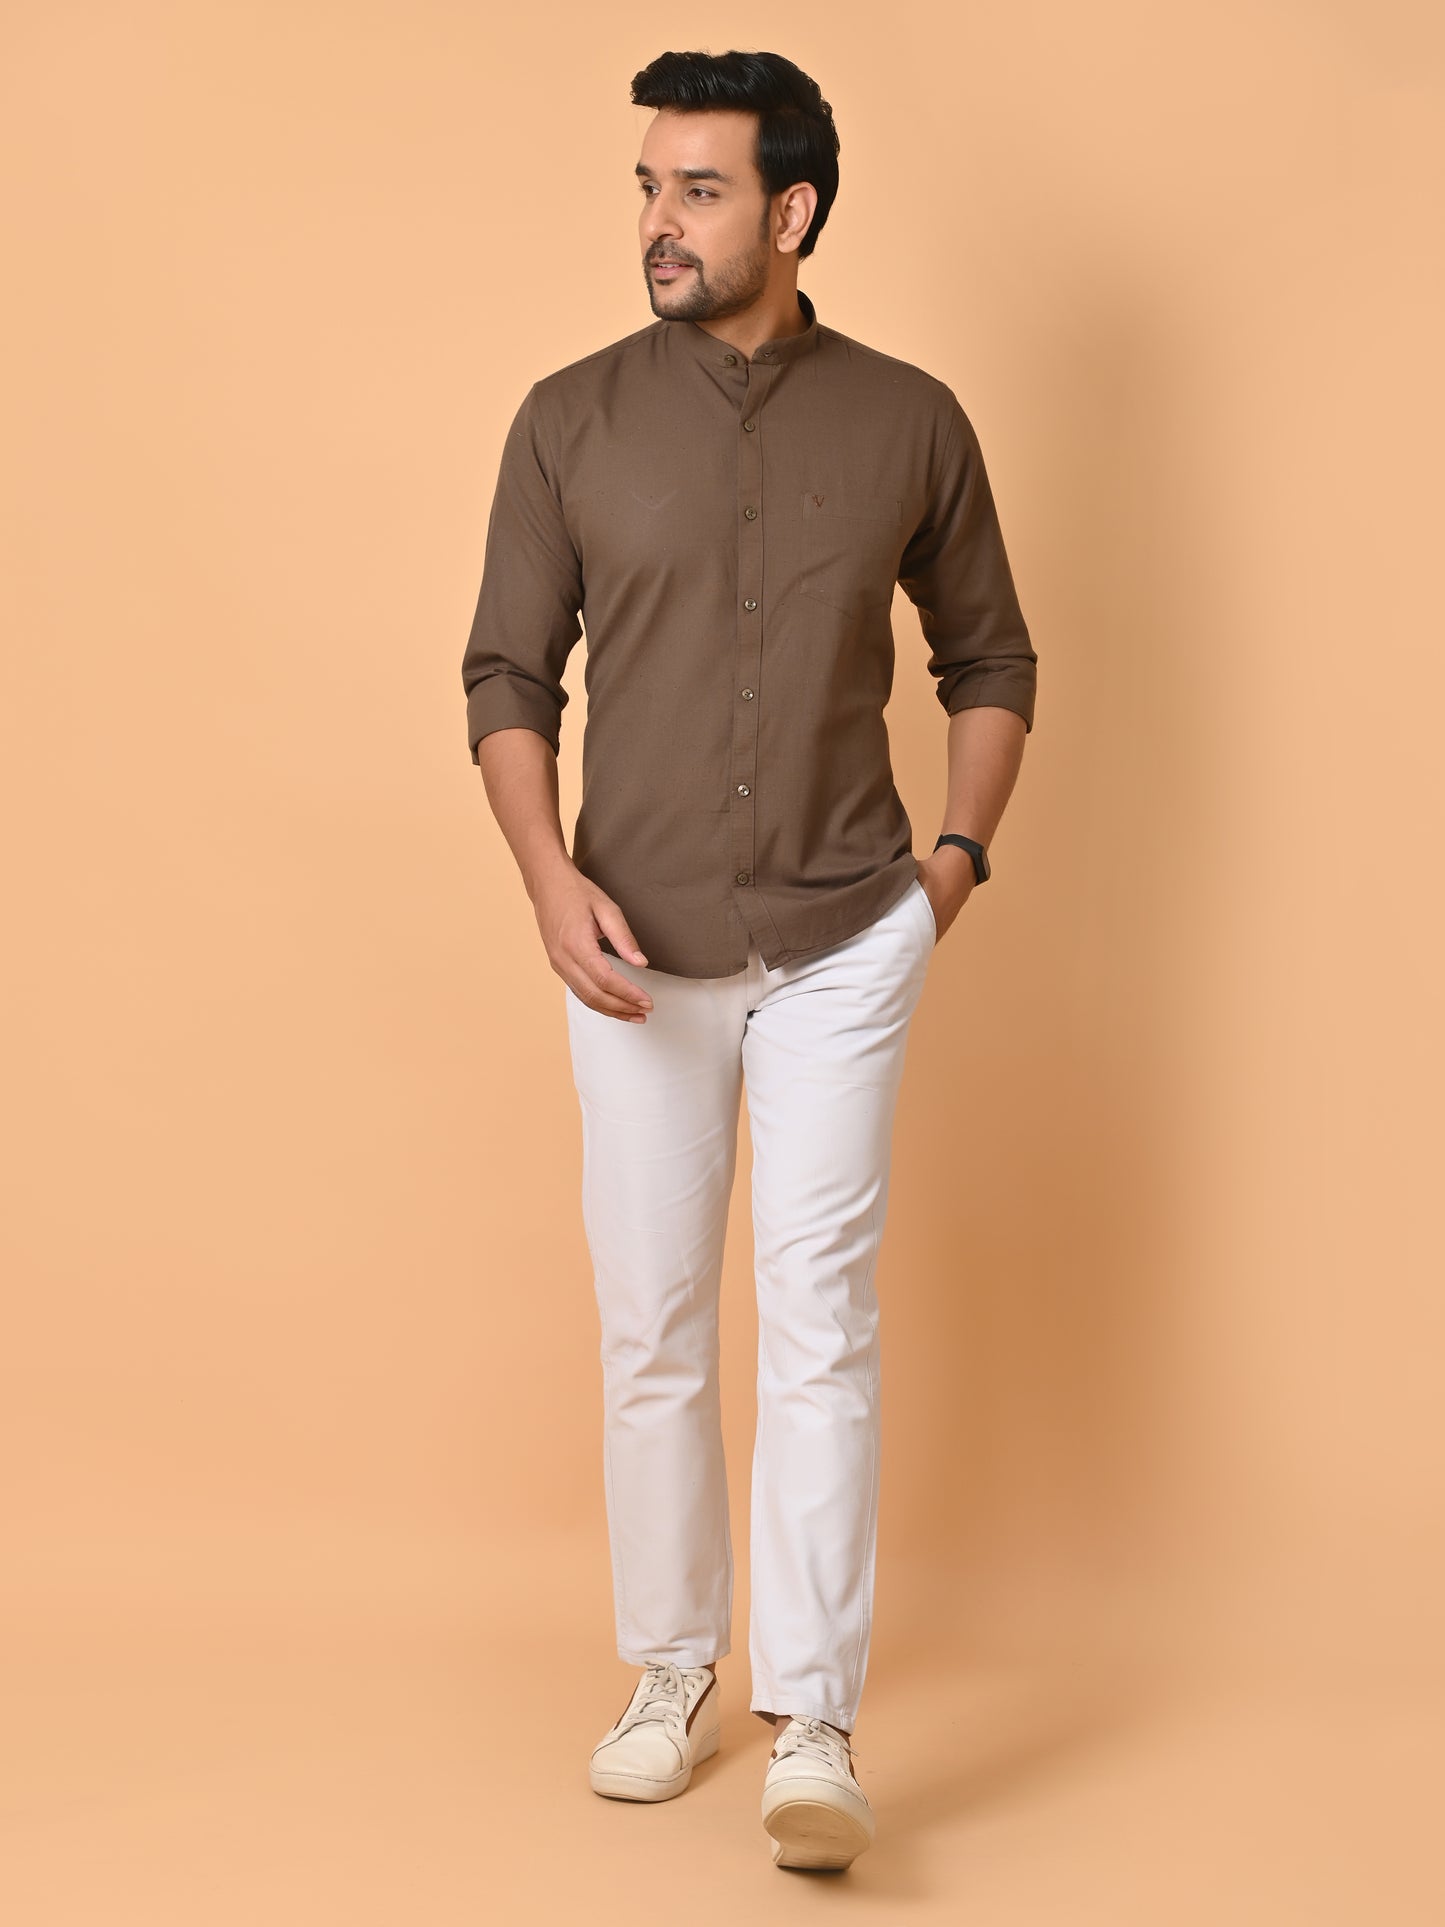 VJR Chocolate Brown Solid Shirt